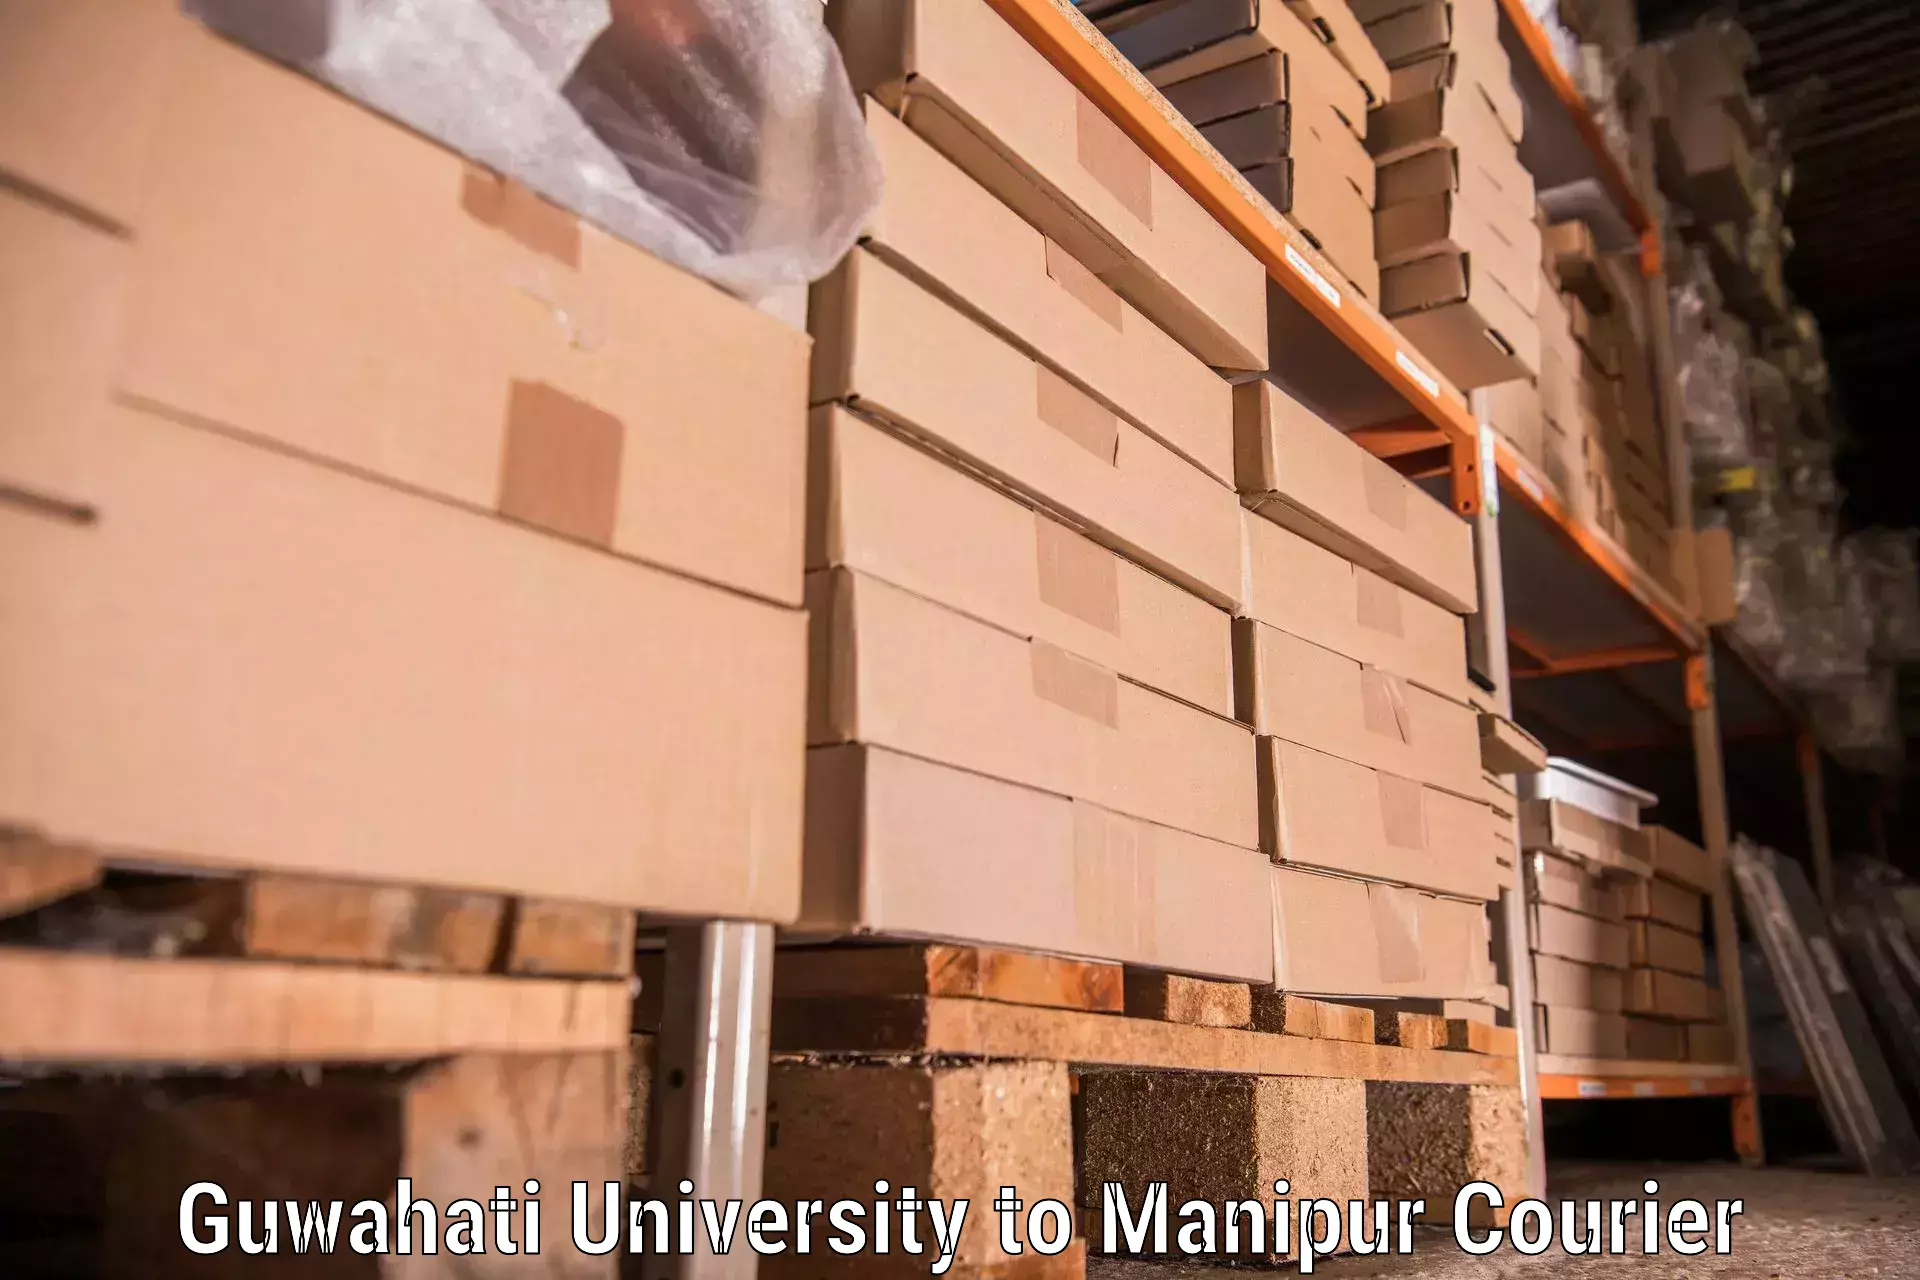 Efficient moving services Guwahati University to Imphal